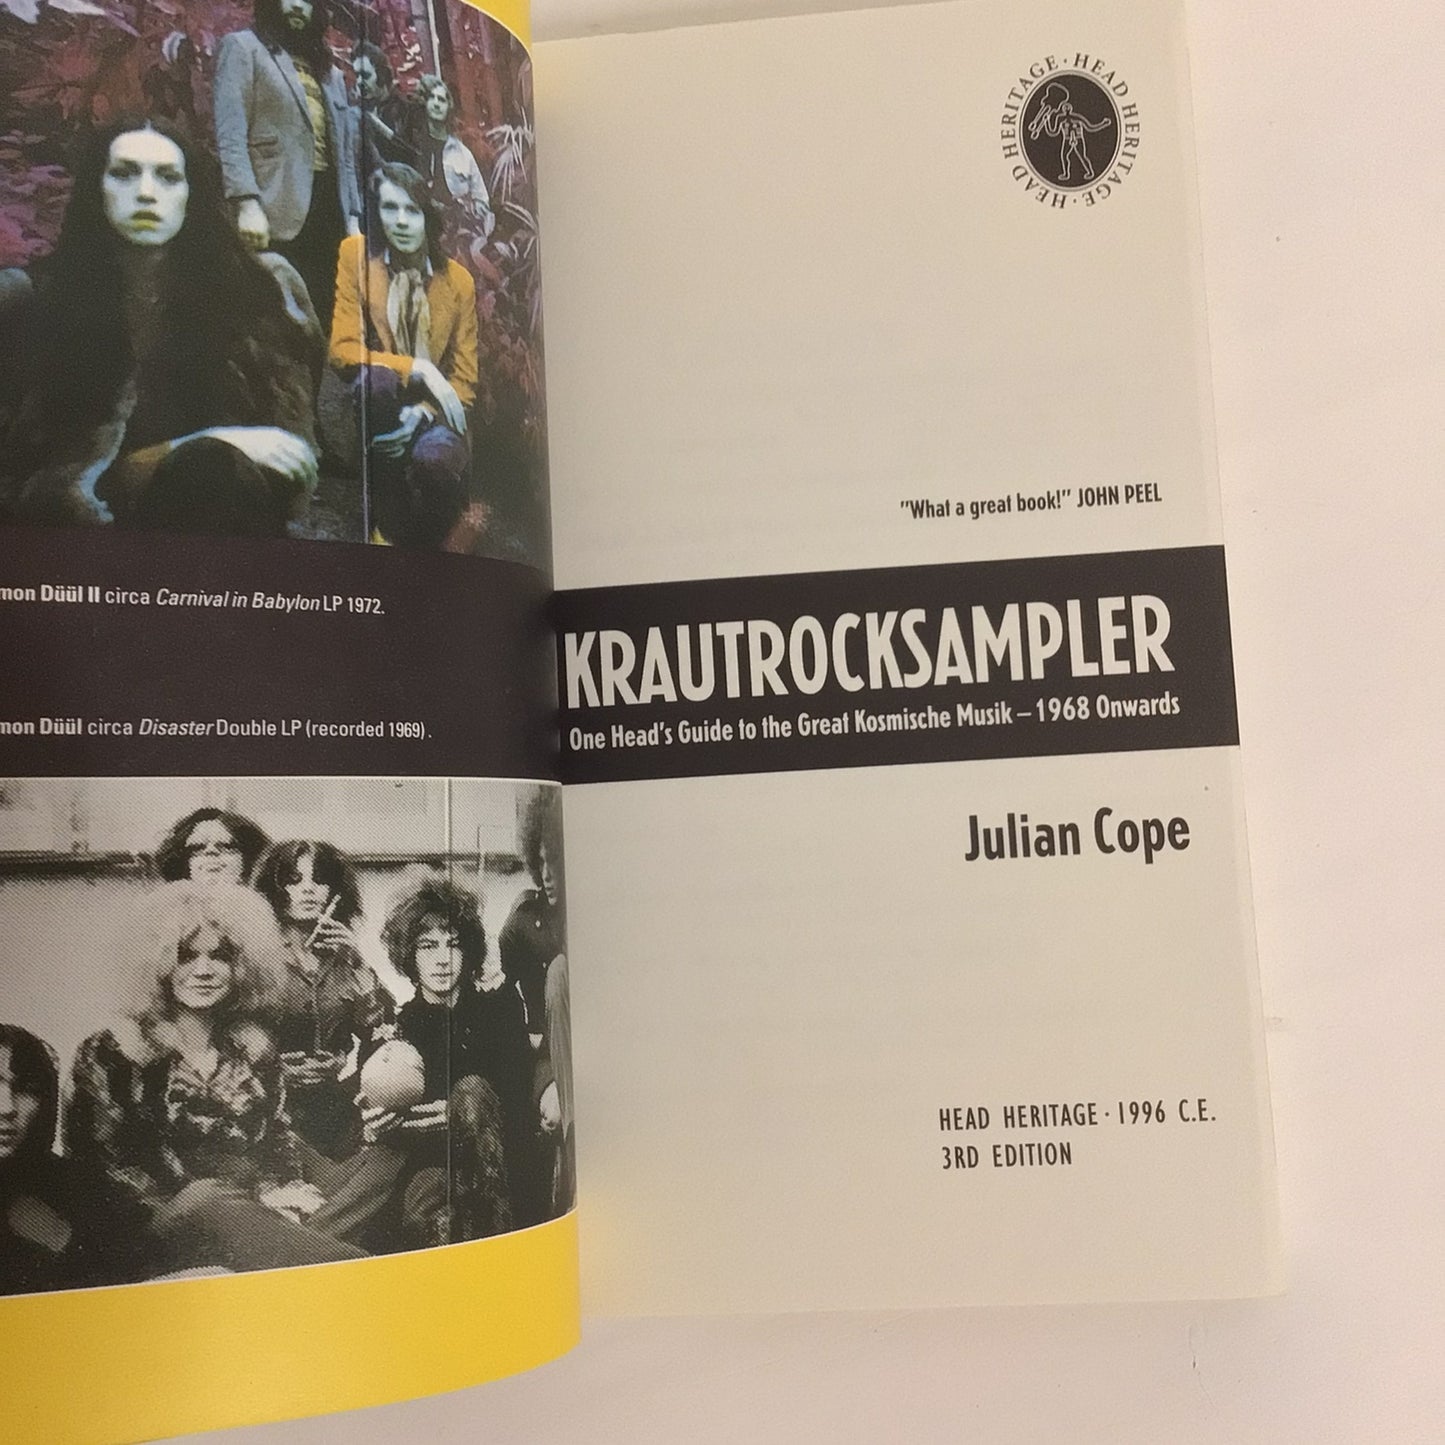 Krautrocksampler; One Head's Guide to the Great Kosmiche Musik by Julian Cope (1996)